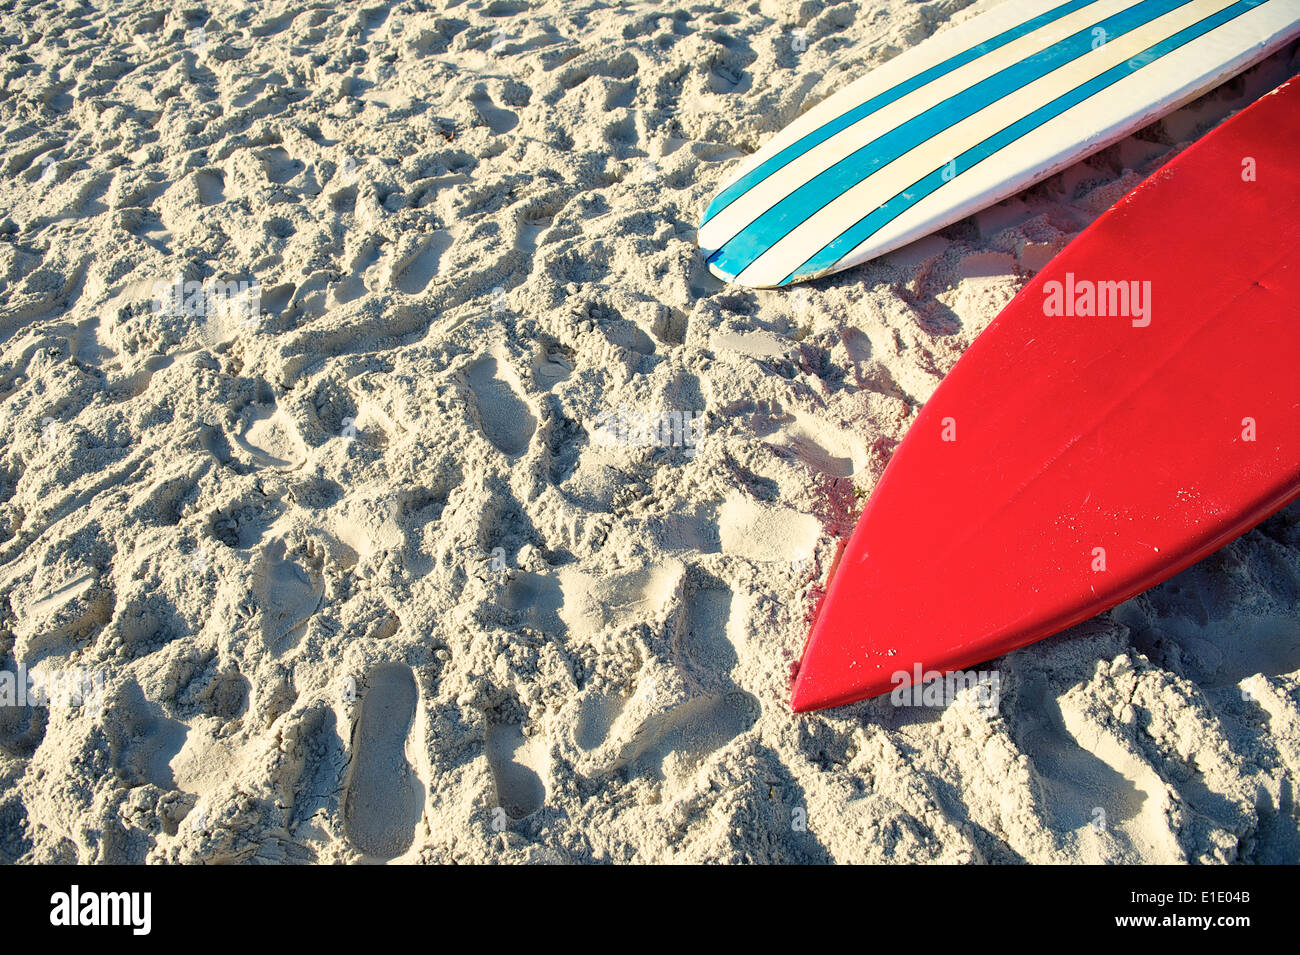 Surfboard and stand up paddle long board in bright red and blue stripes on Copacabana Beach Rio de Janeiro Stock Photo